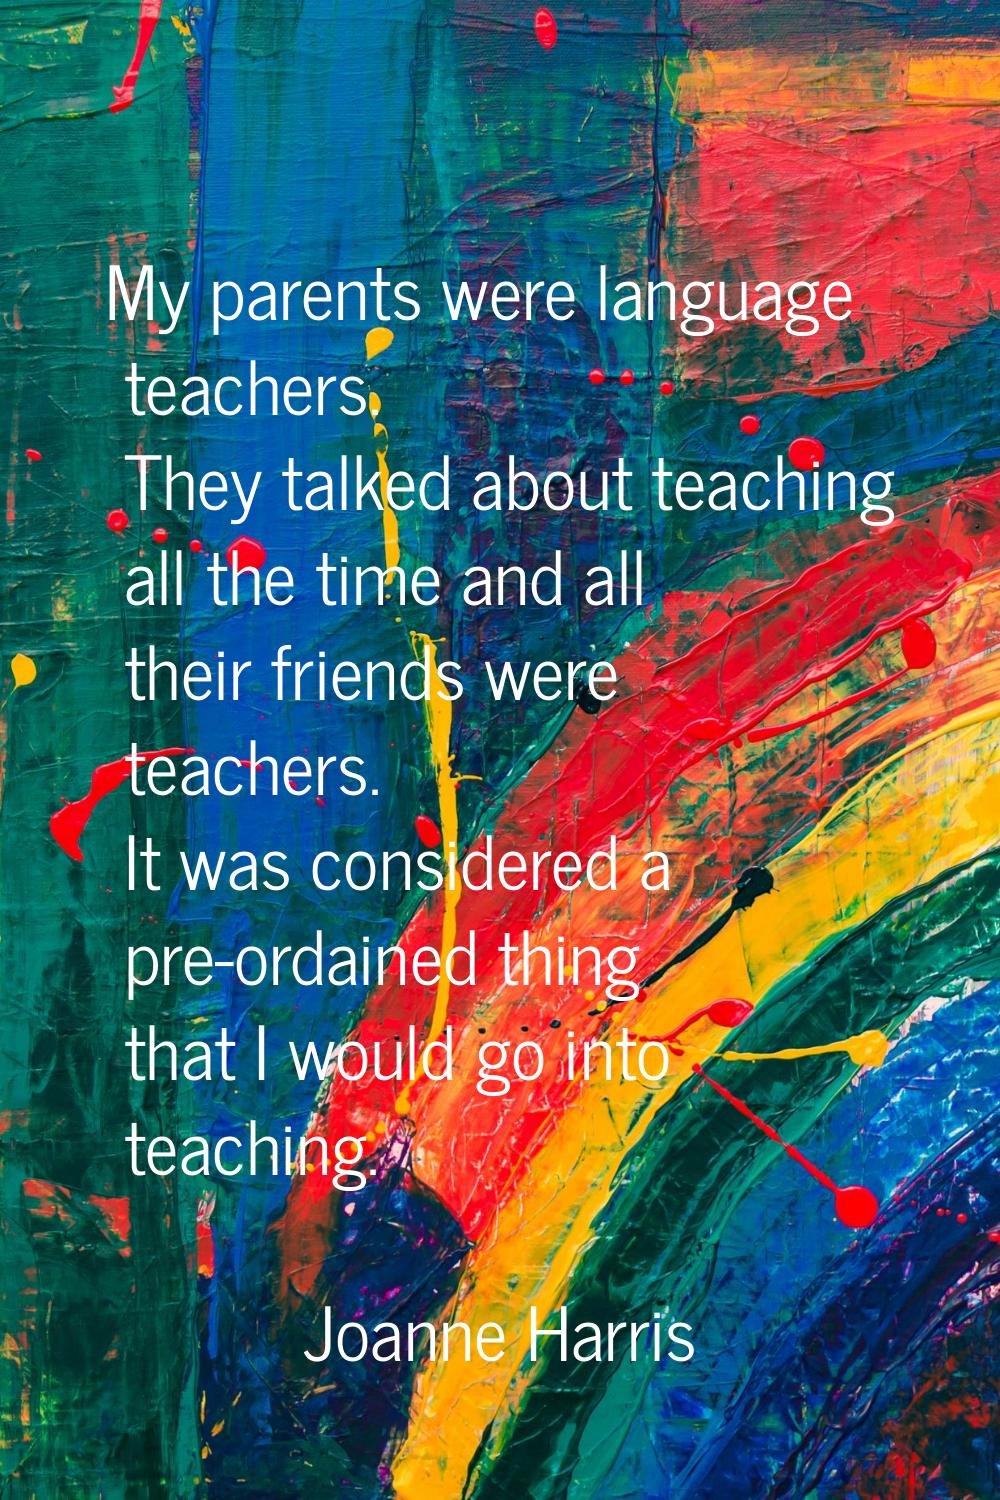 My parents were language teachers. They talked about teaching all the time and all their friends we